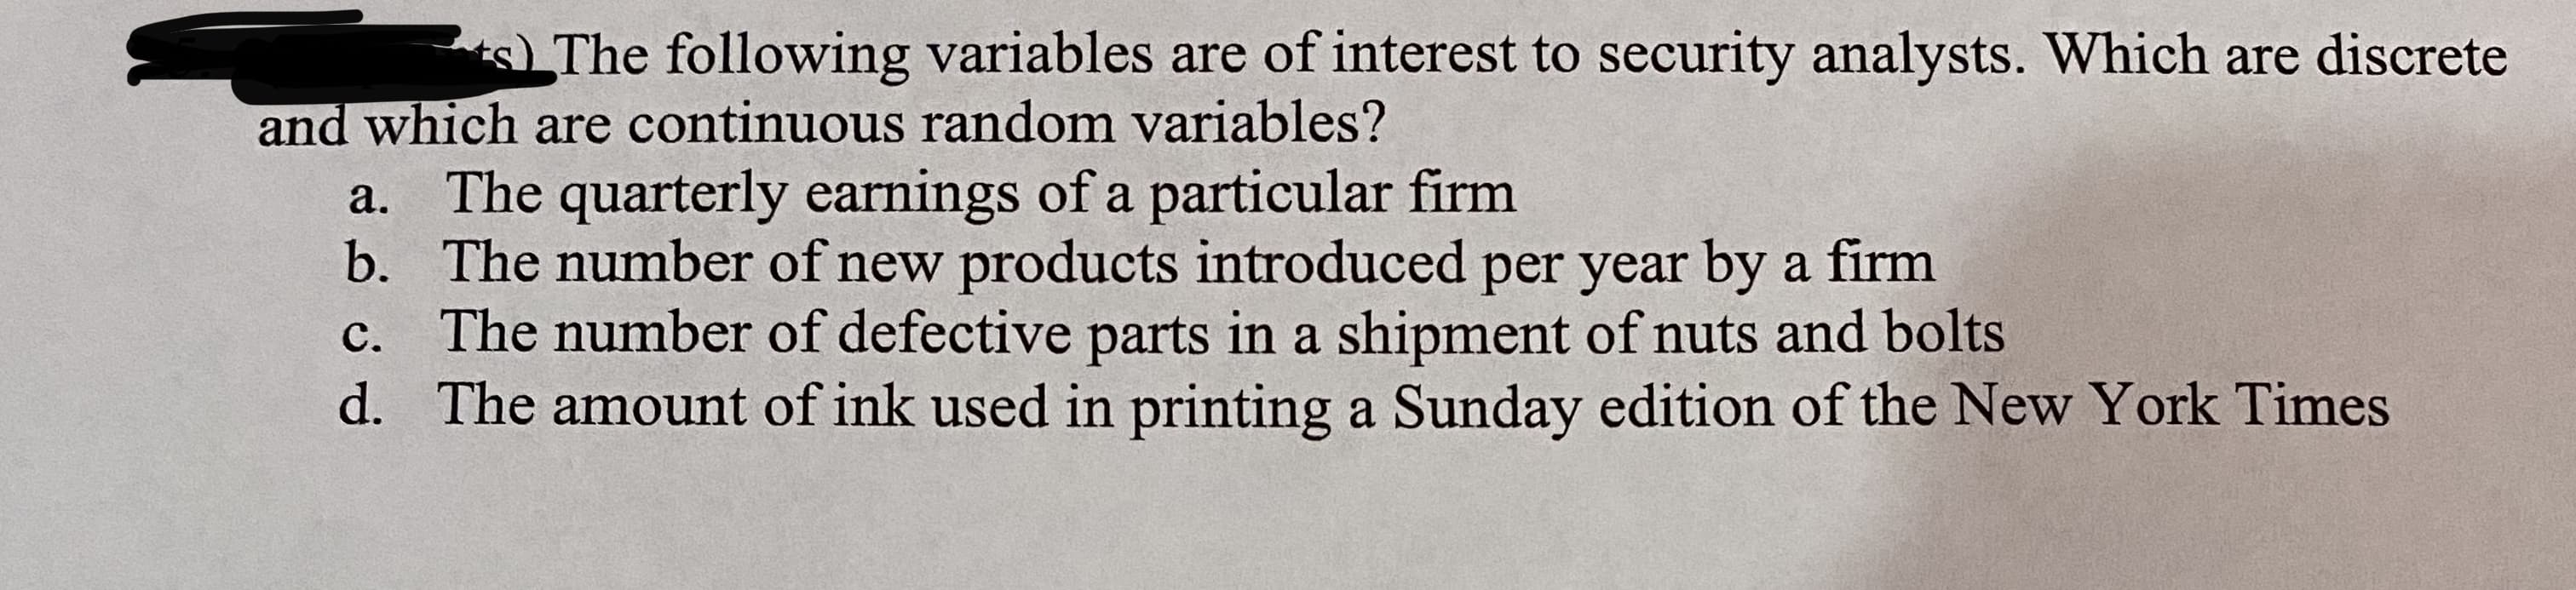 sThe following variables are of interest to security analysts. Which are discrete
and which are continuous random variables?
The quarterly earnings of a particular firm
b. The number of new products introduced per year by a firm
The number of defective parts in a shipment of nuts and bolts
d. The amount of ink used in printing a Sunday edition of the New York Times
a.
C.
